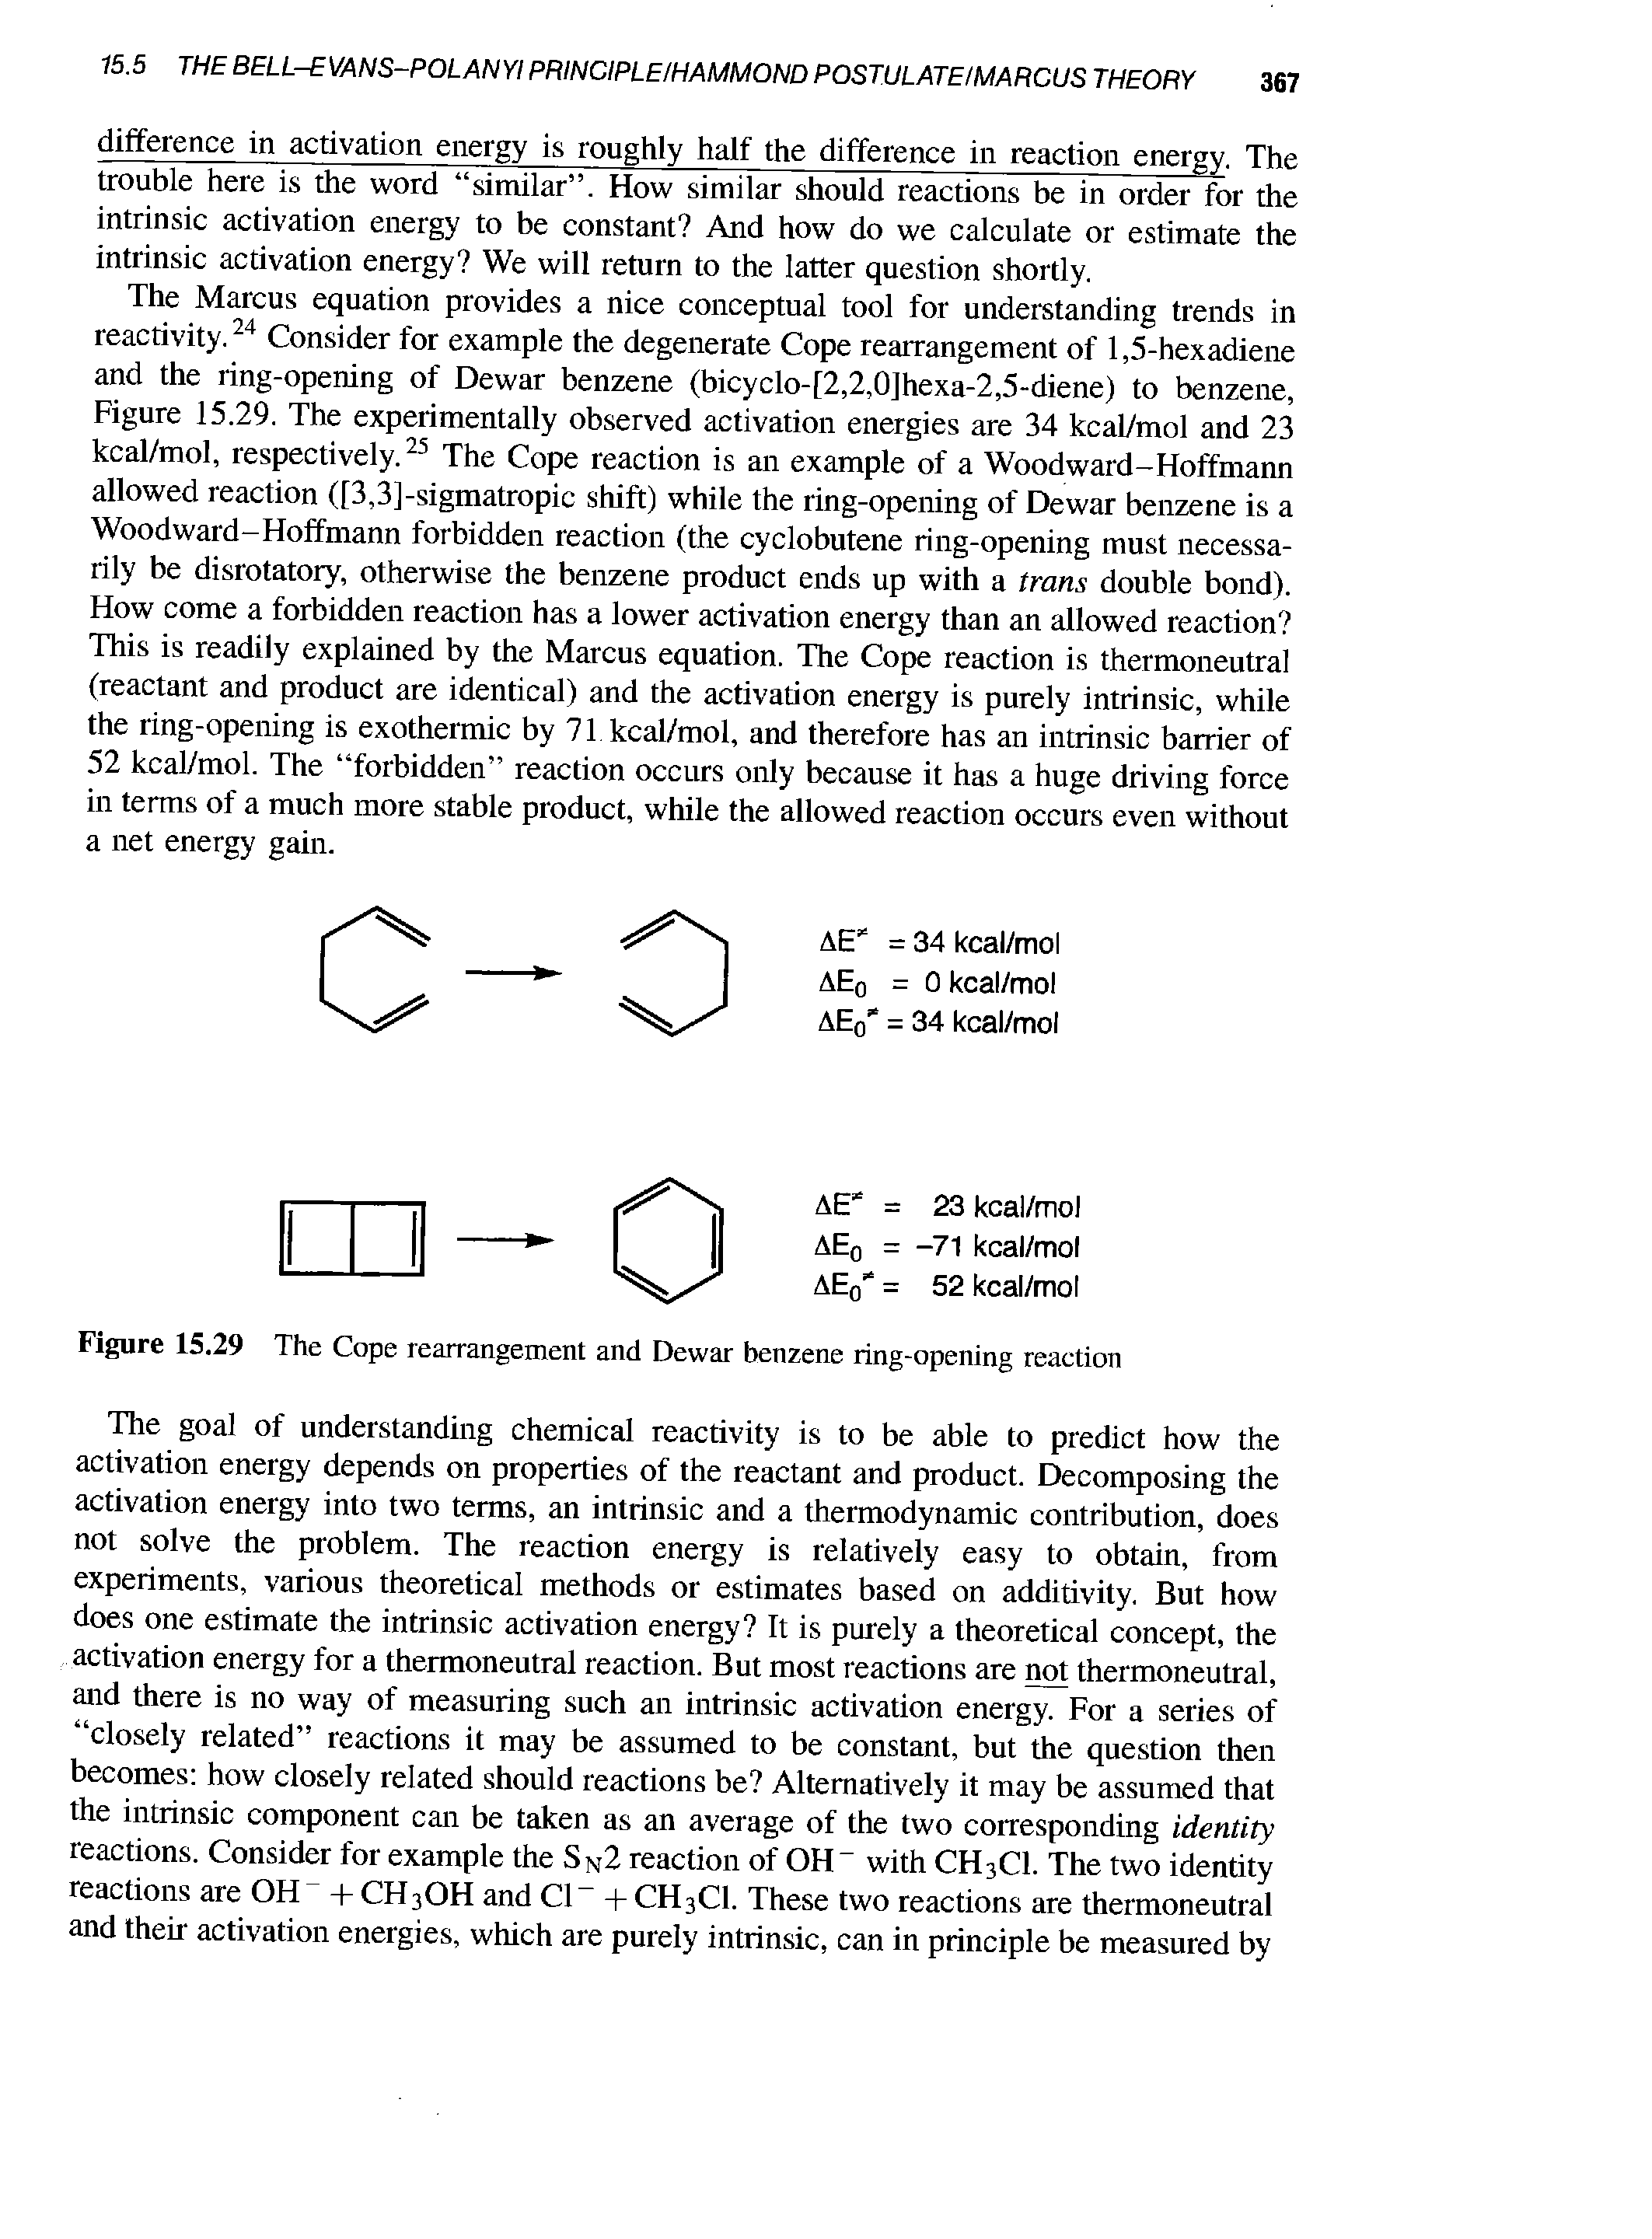 Figure 15.29 The Cope rearrangement and Dewar benzene ring-opening reaction...